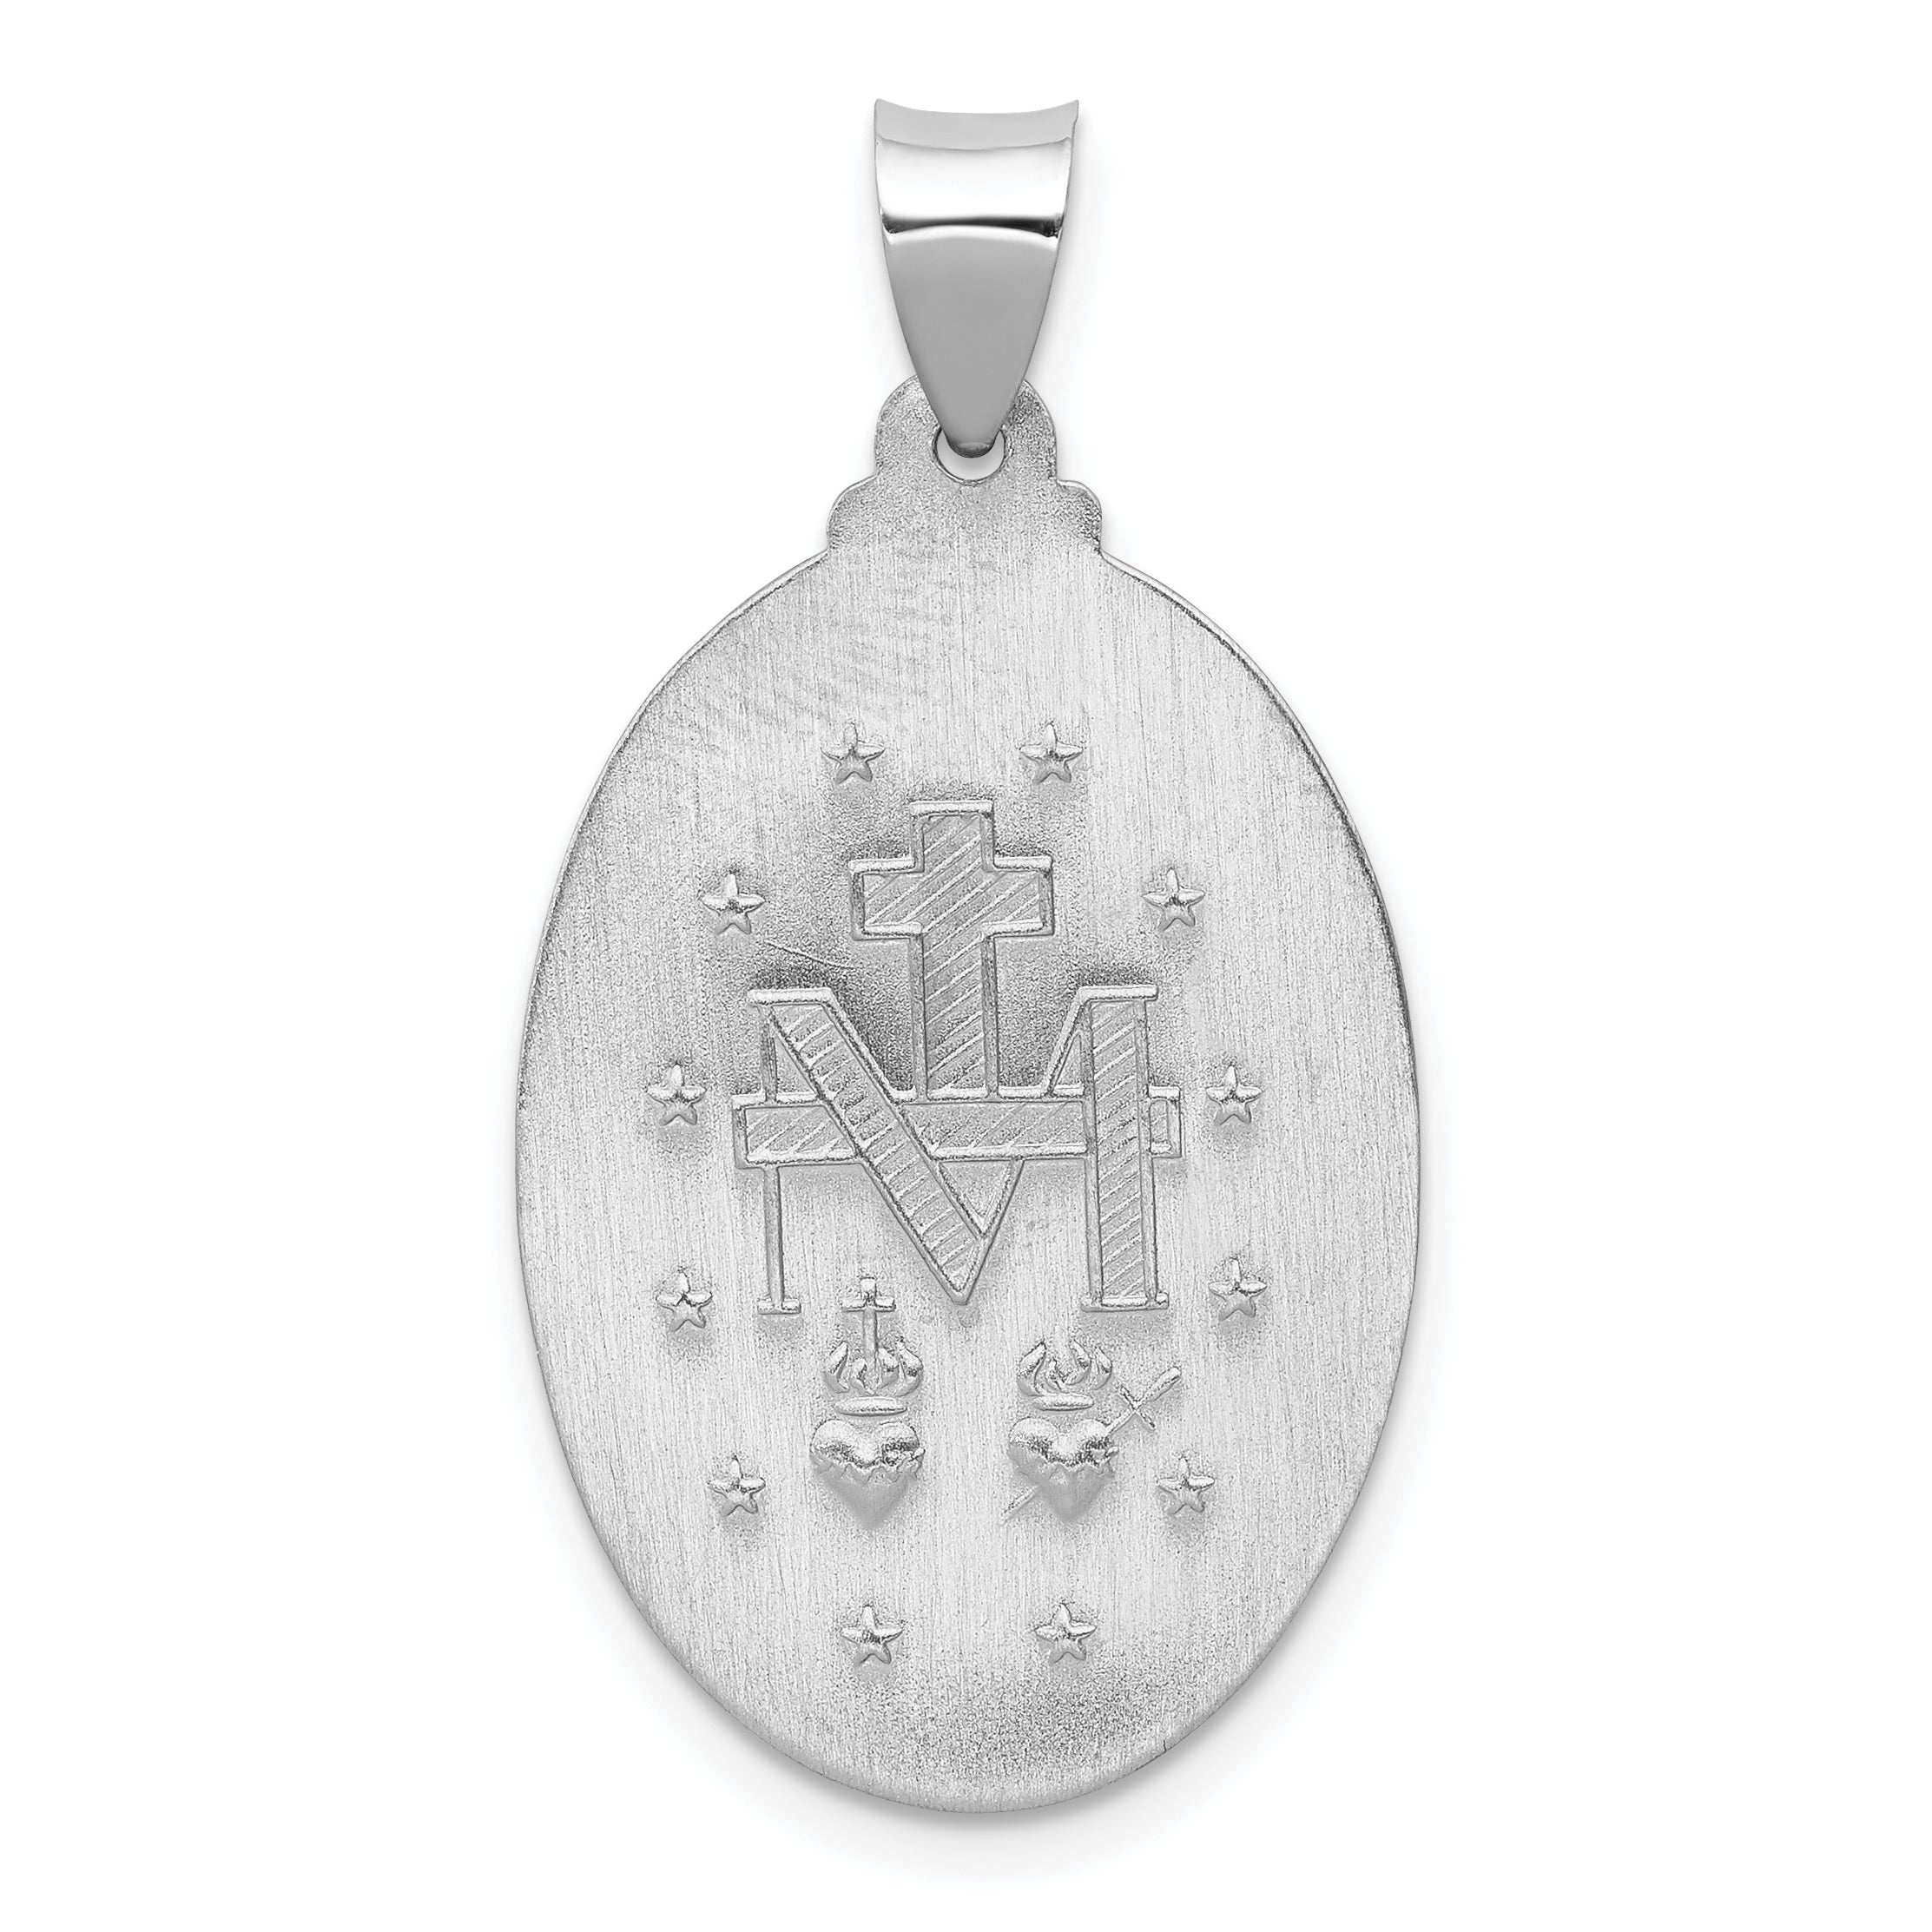 14K White Gold Polished/Satin Miraculous Medal Hollow Pendant